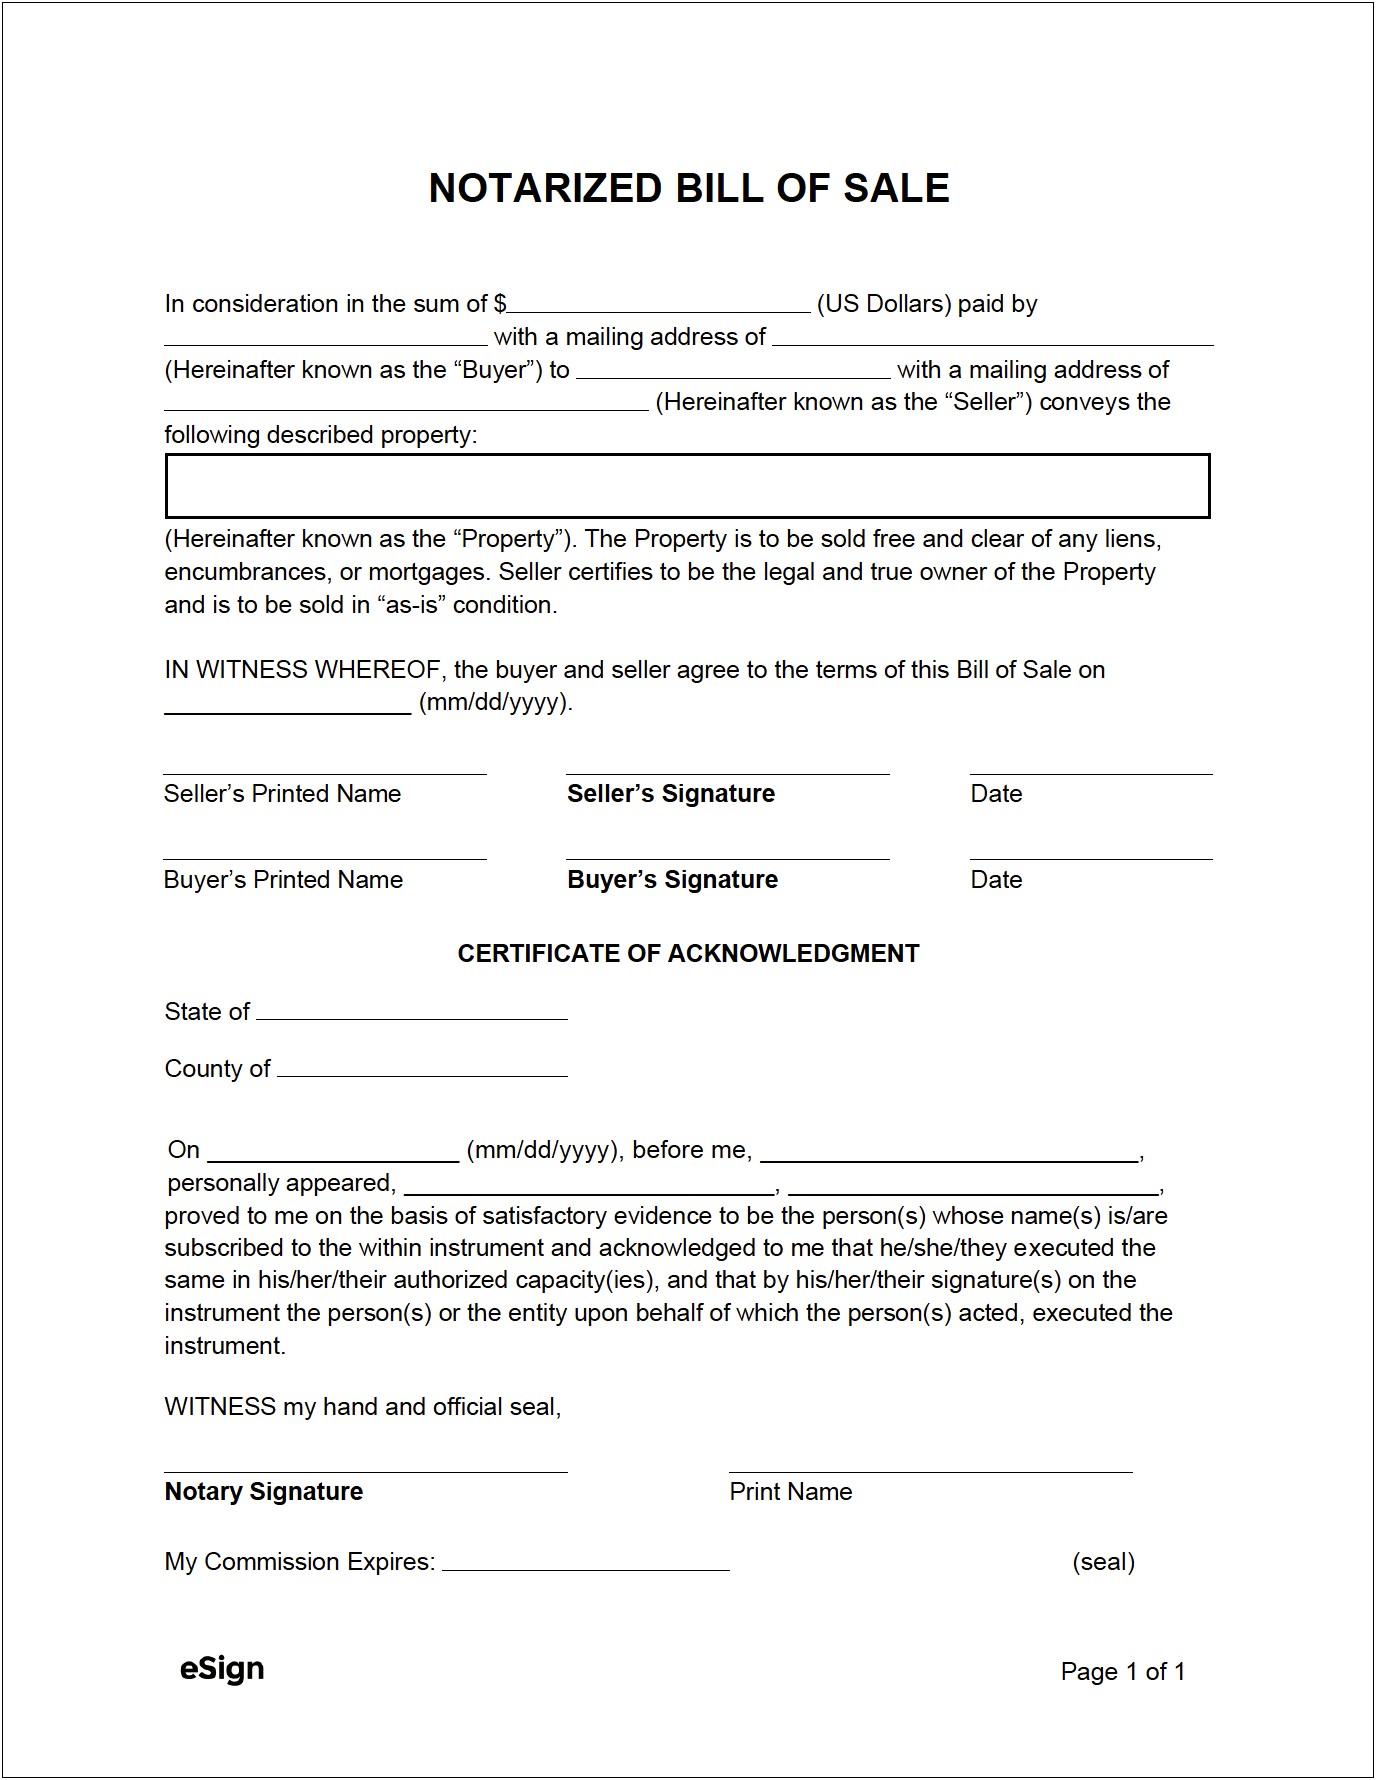 Free Notarized Bill Of Sale Template